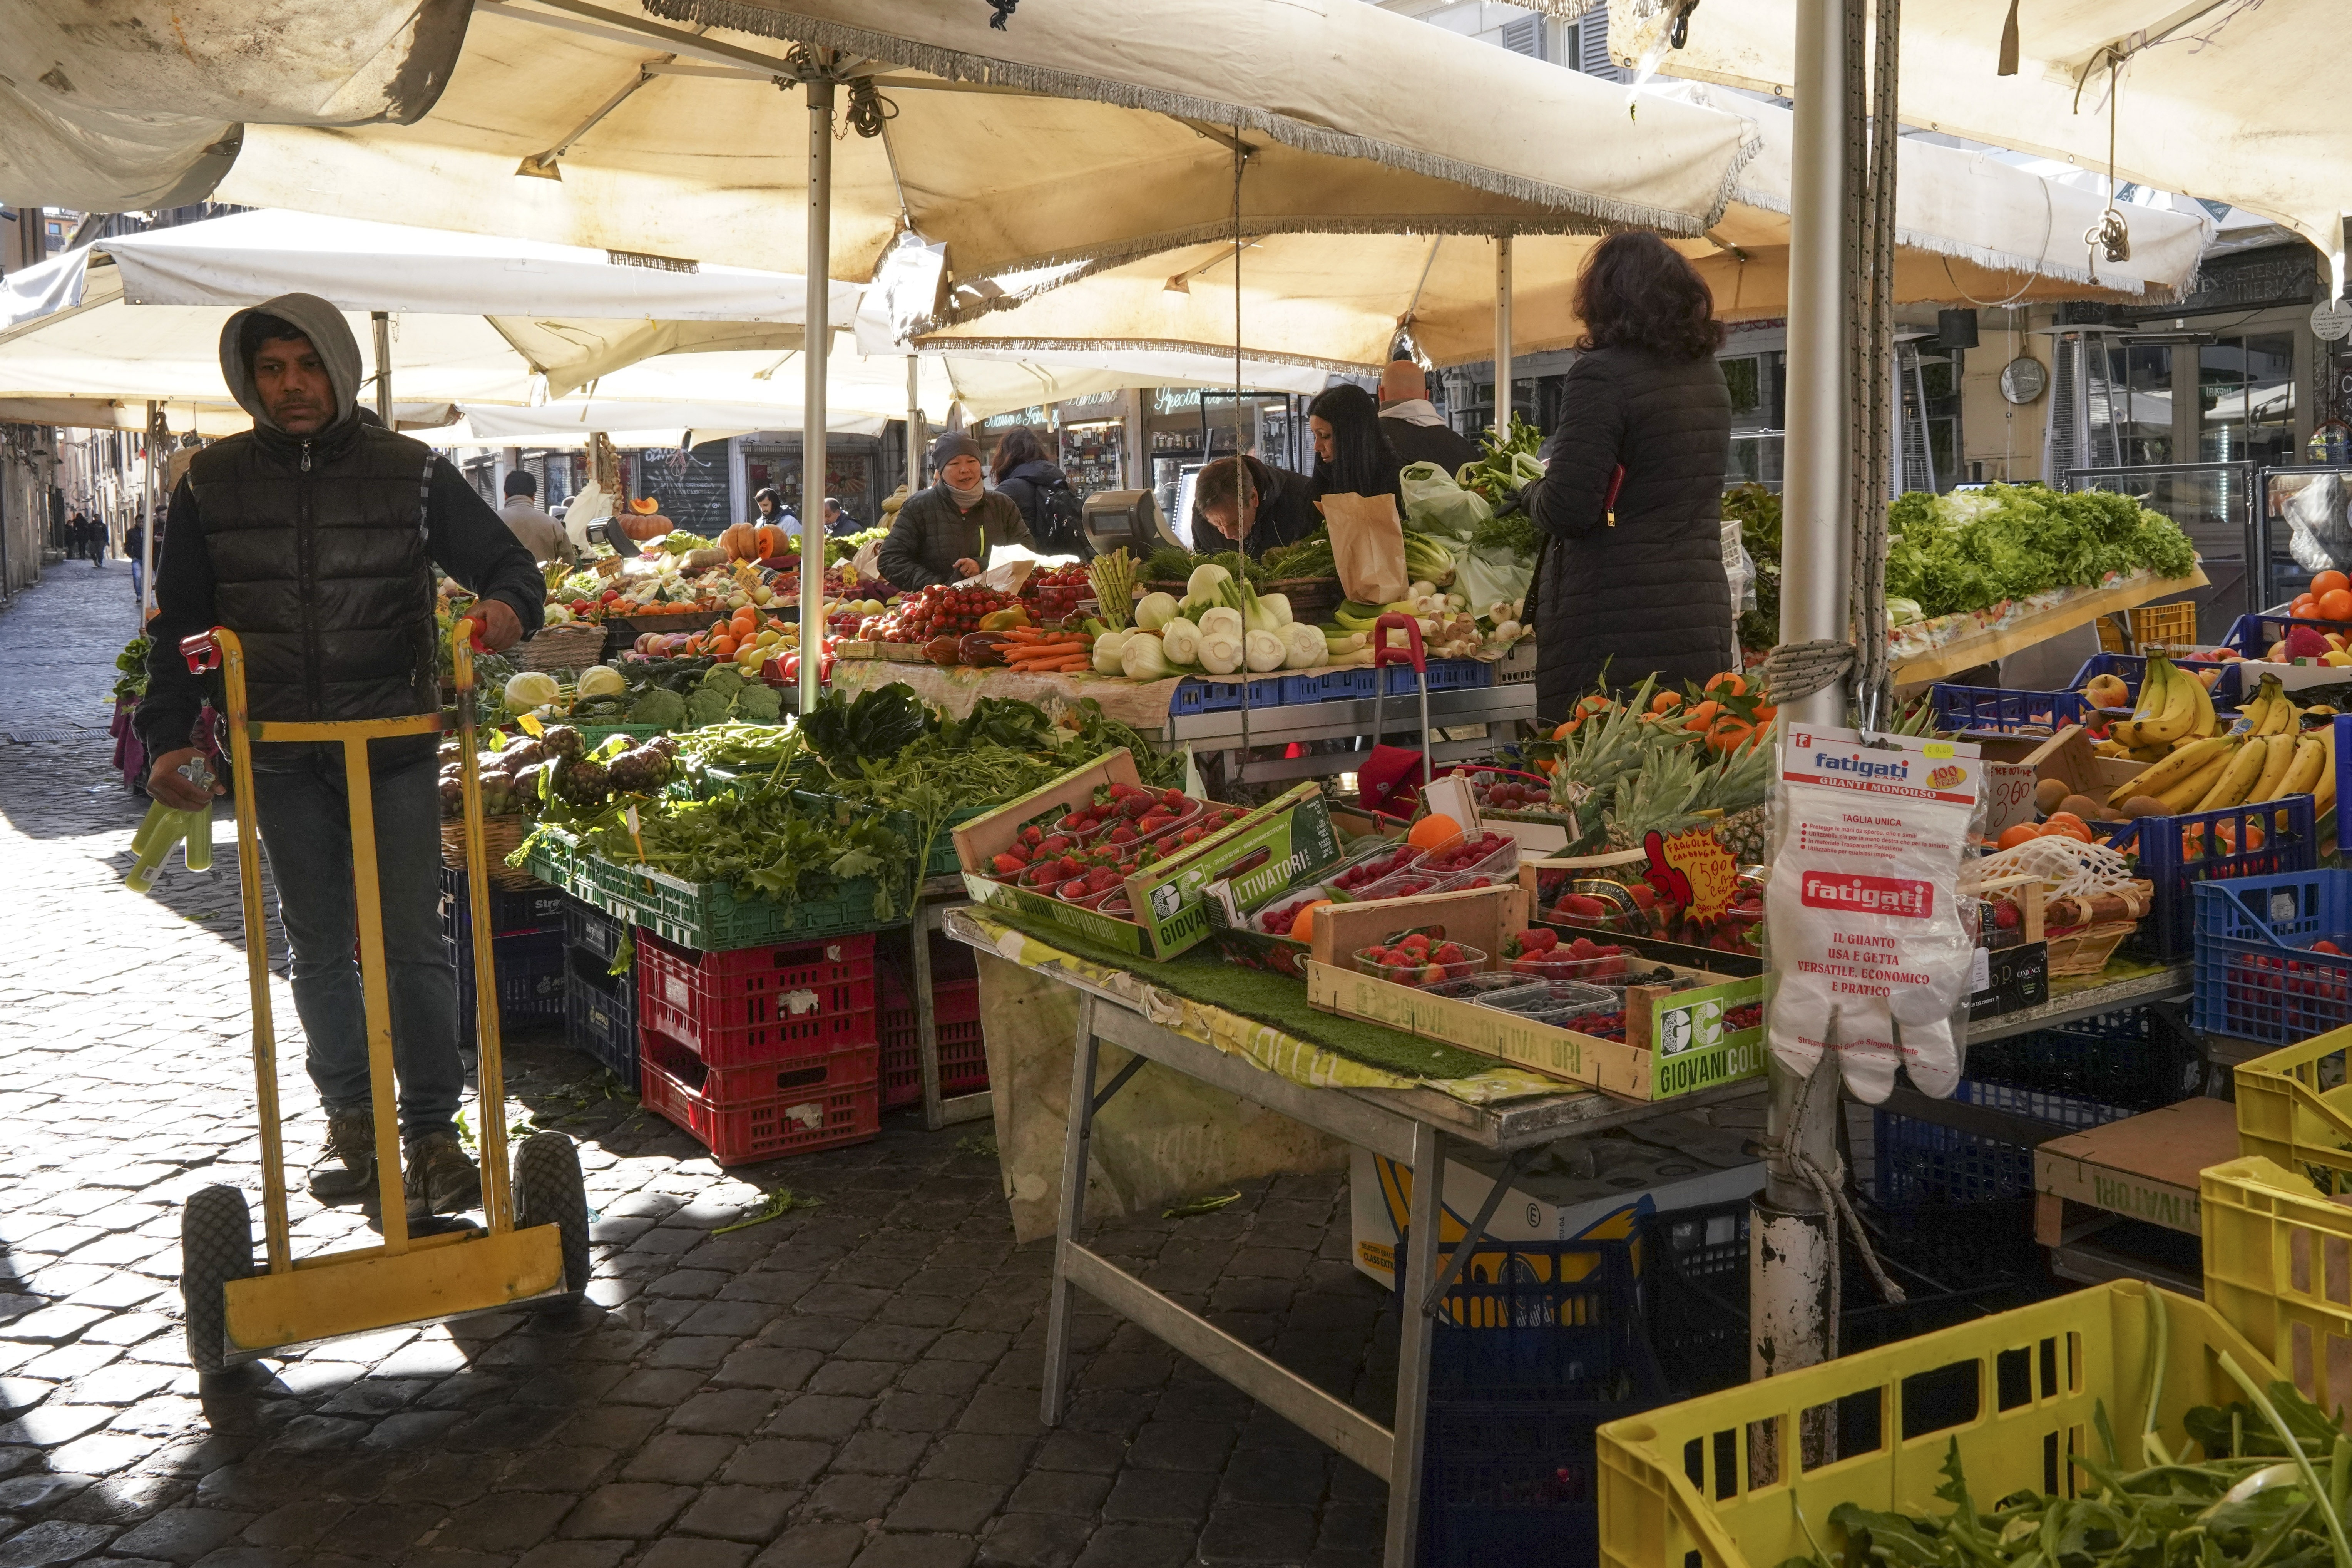 A man pushes a trolley as gloves hang at a fruit and vegetable stand at Campo dei Fiori open-air market, in Rome, Tuesday, March 10, 2020. The Italian government is assuring its citizens that supermarkets will remain open and stocked after panic buying erupted after broad anti-virus measures were announced nationwide, sparking overnight runs on 24-hour markets. (AP Photo/Andrew Medichini)